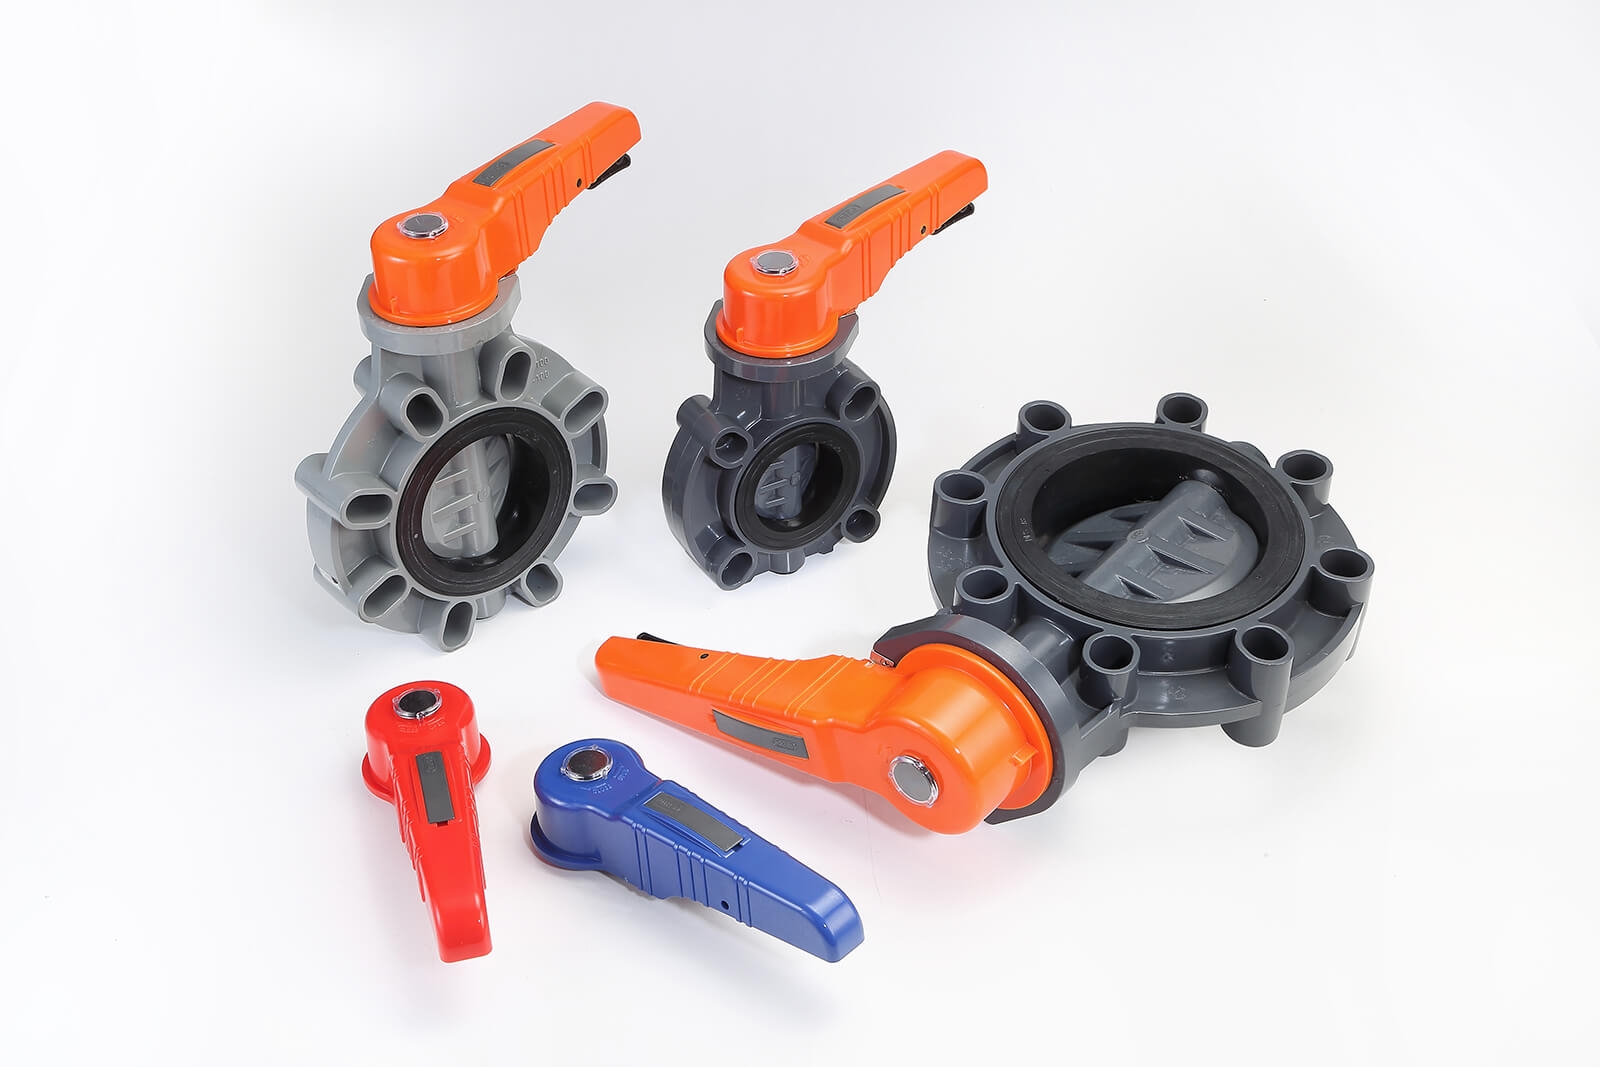 BUTTERFLY VALVE - HANDLE TYPE